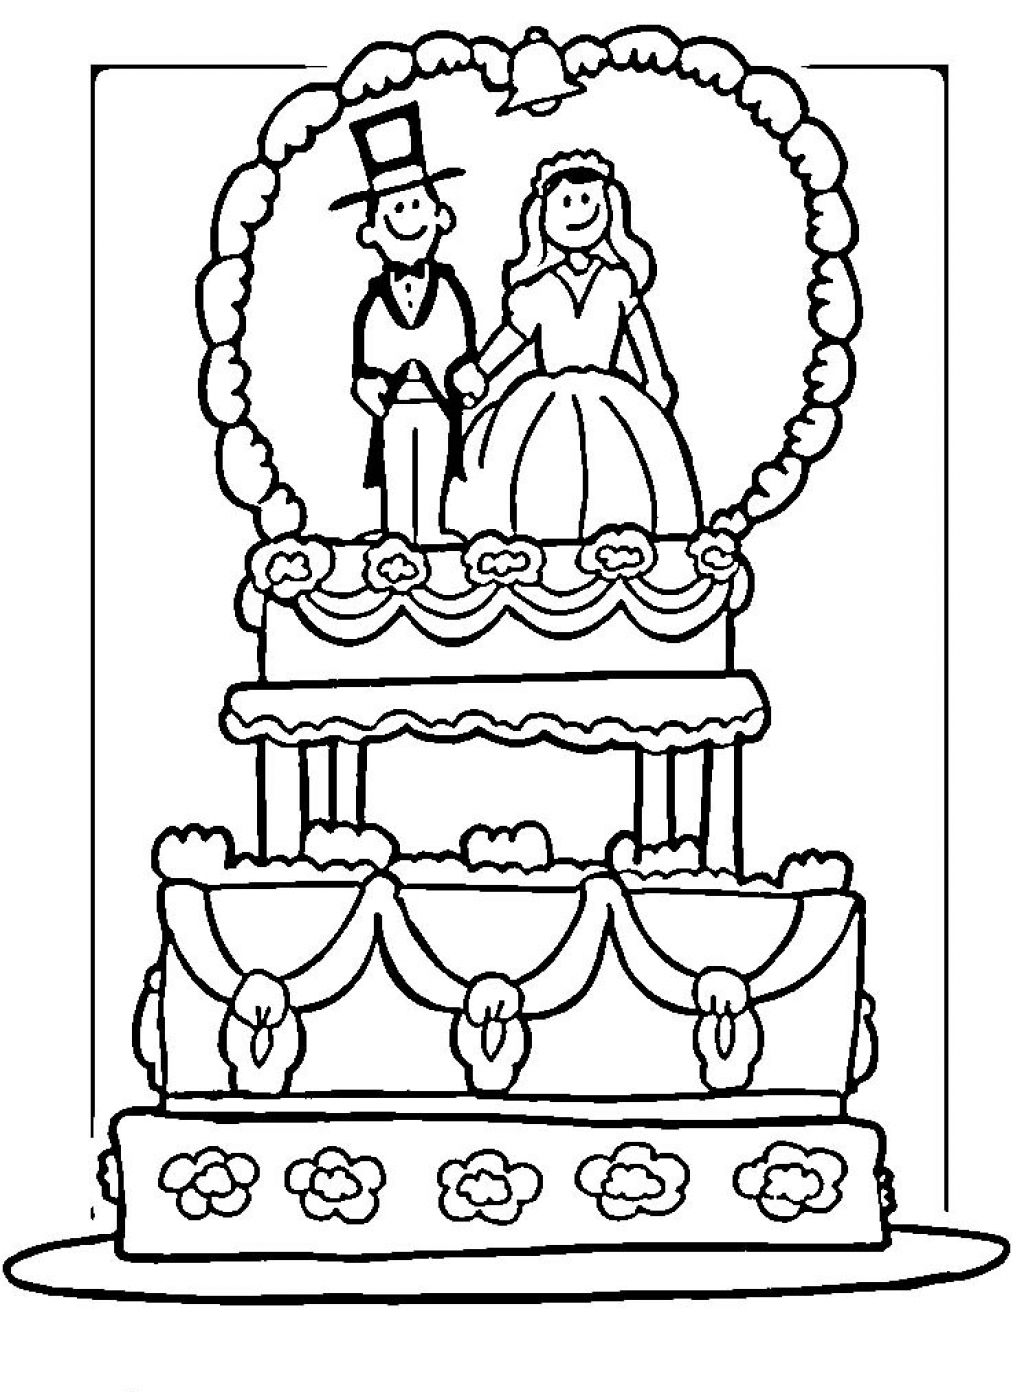 drawing-marriage-56017-holidays-and-special-occasions-printable-coloring-pages